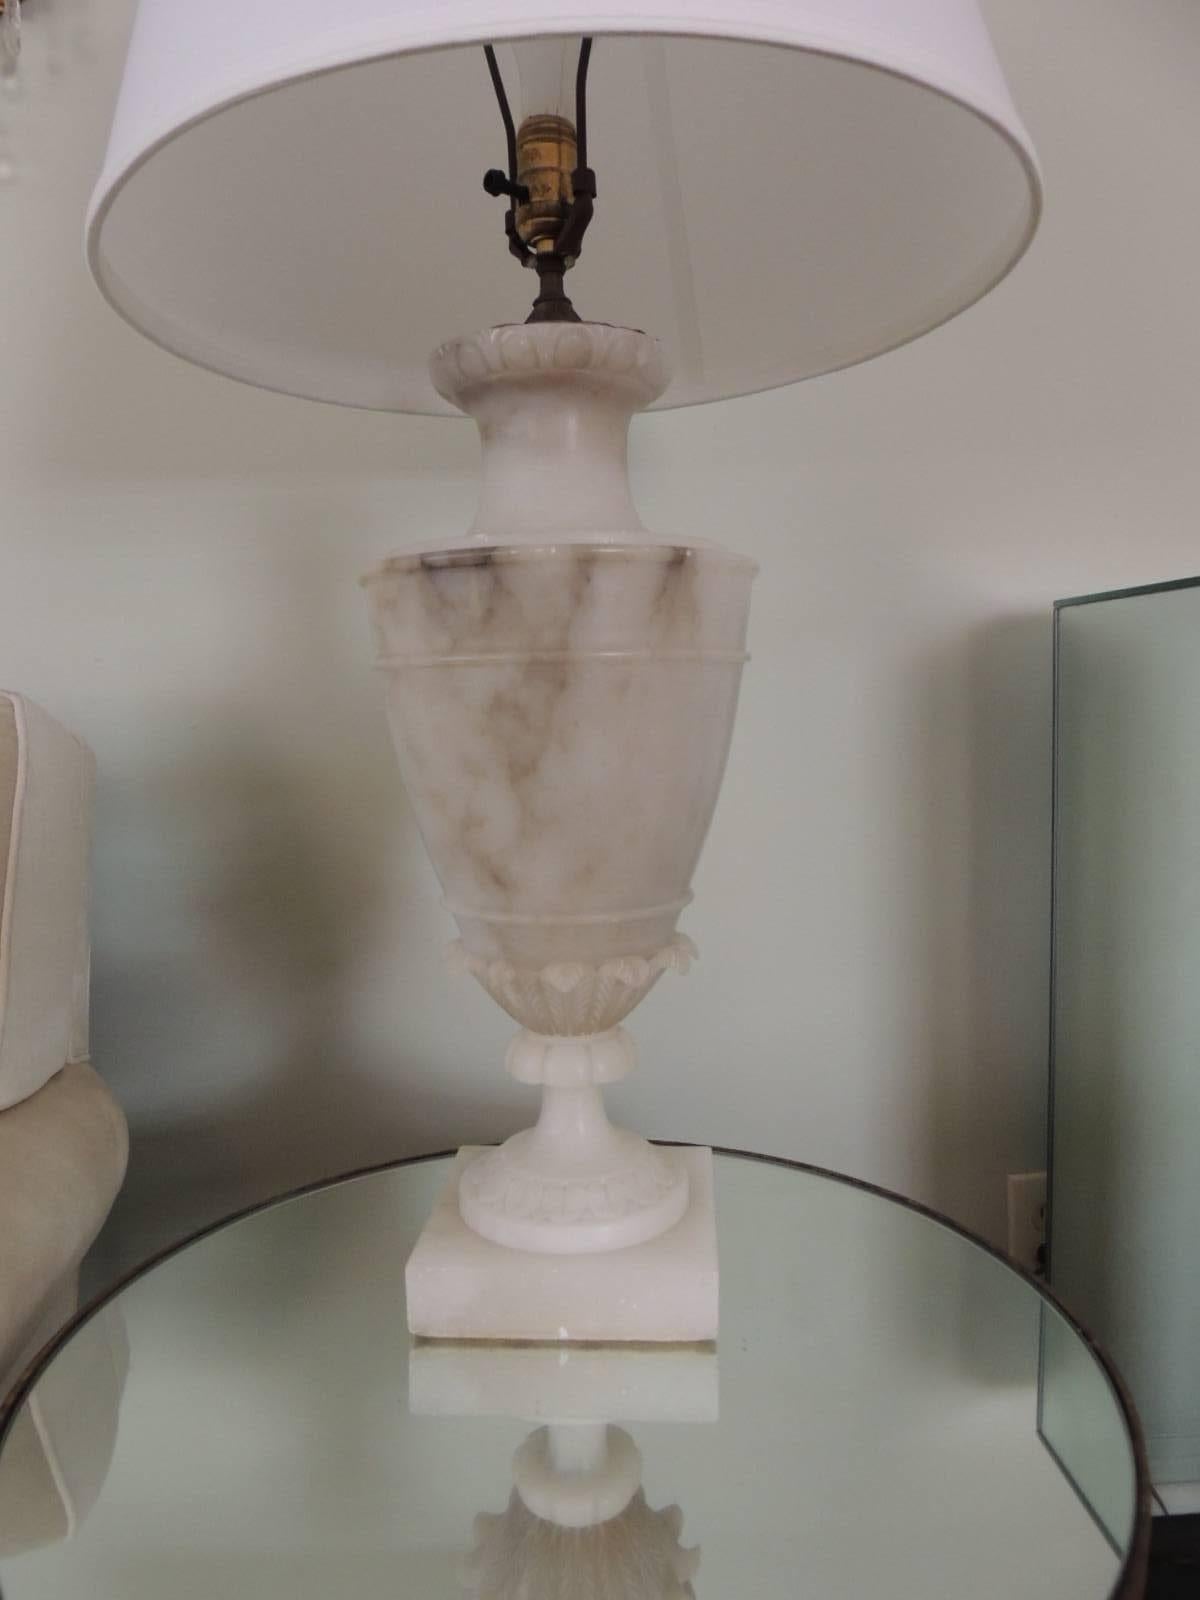 Tall Alabaster Table Lamp in Grey and White,accentuated with small leaves relief and small fluted pedestal base.  Three way switch , no shade,harp and finial included. The top of the lamp has an intricate base cover in antique brass.
Note: small